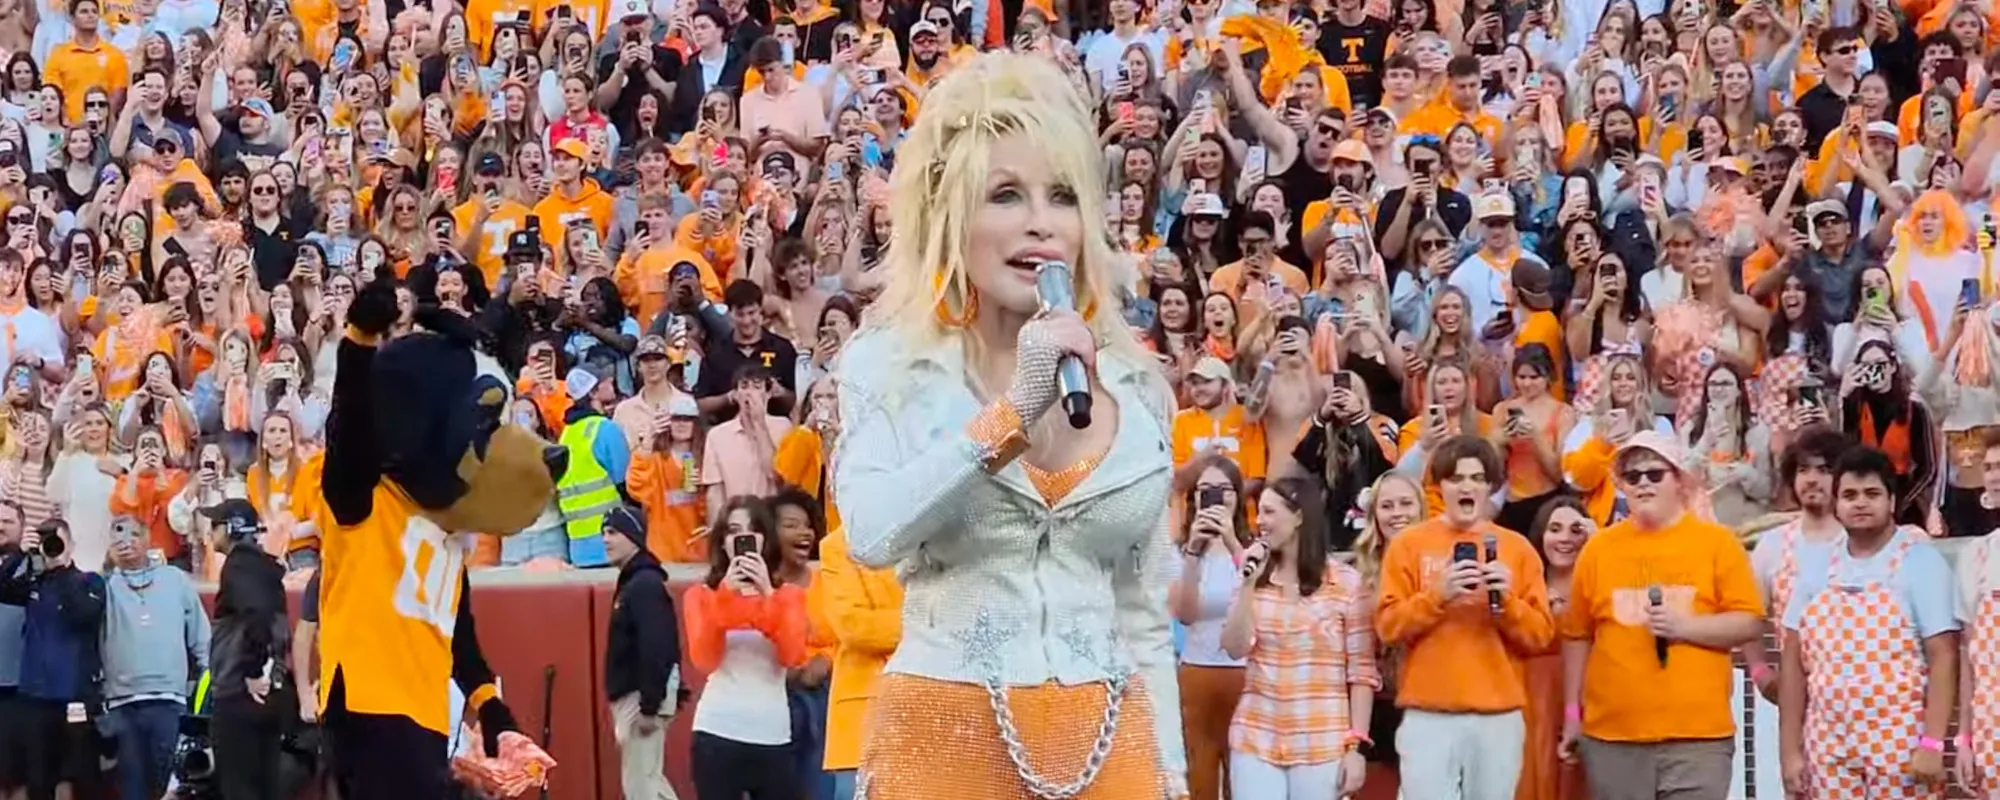 Dolly Parton Performs "Rocky Top" at Tennessee Football Game